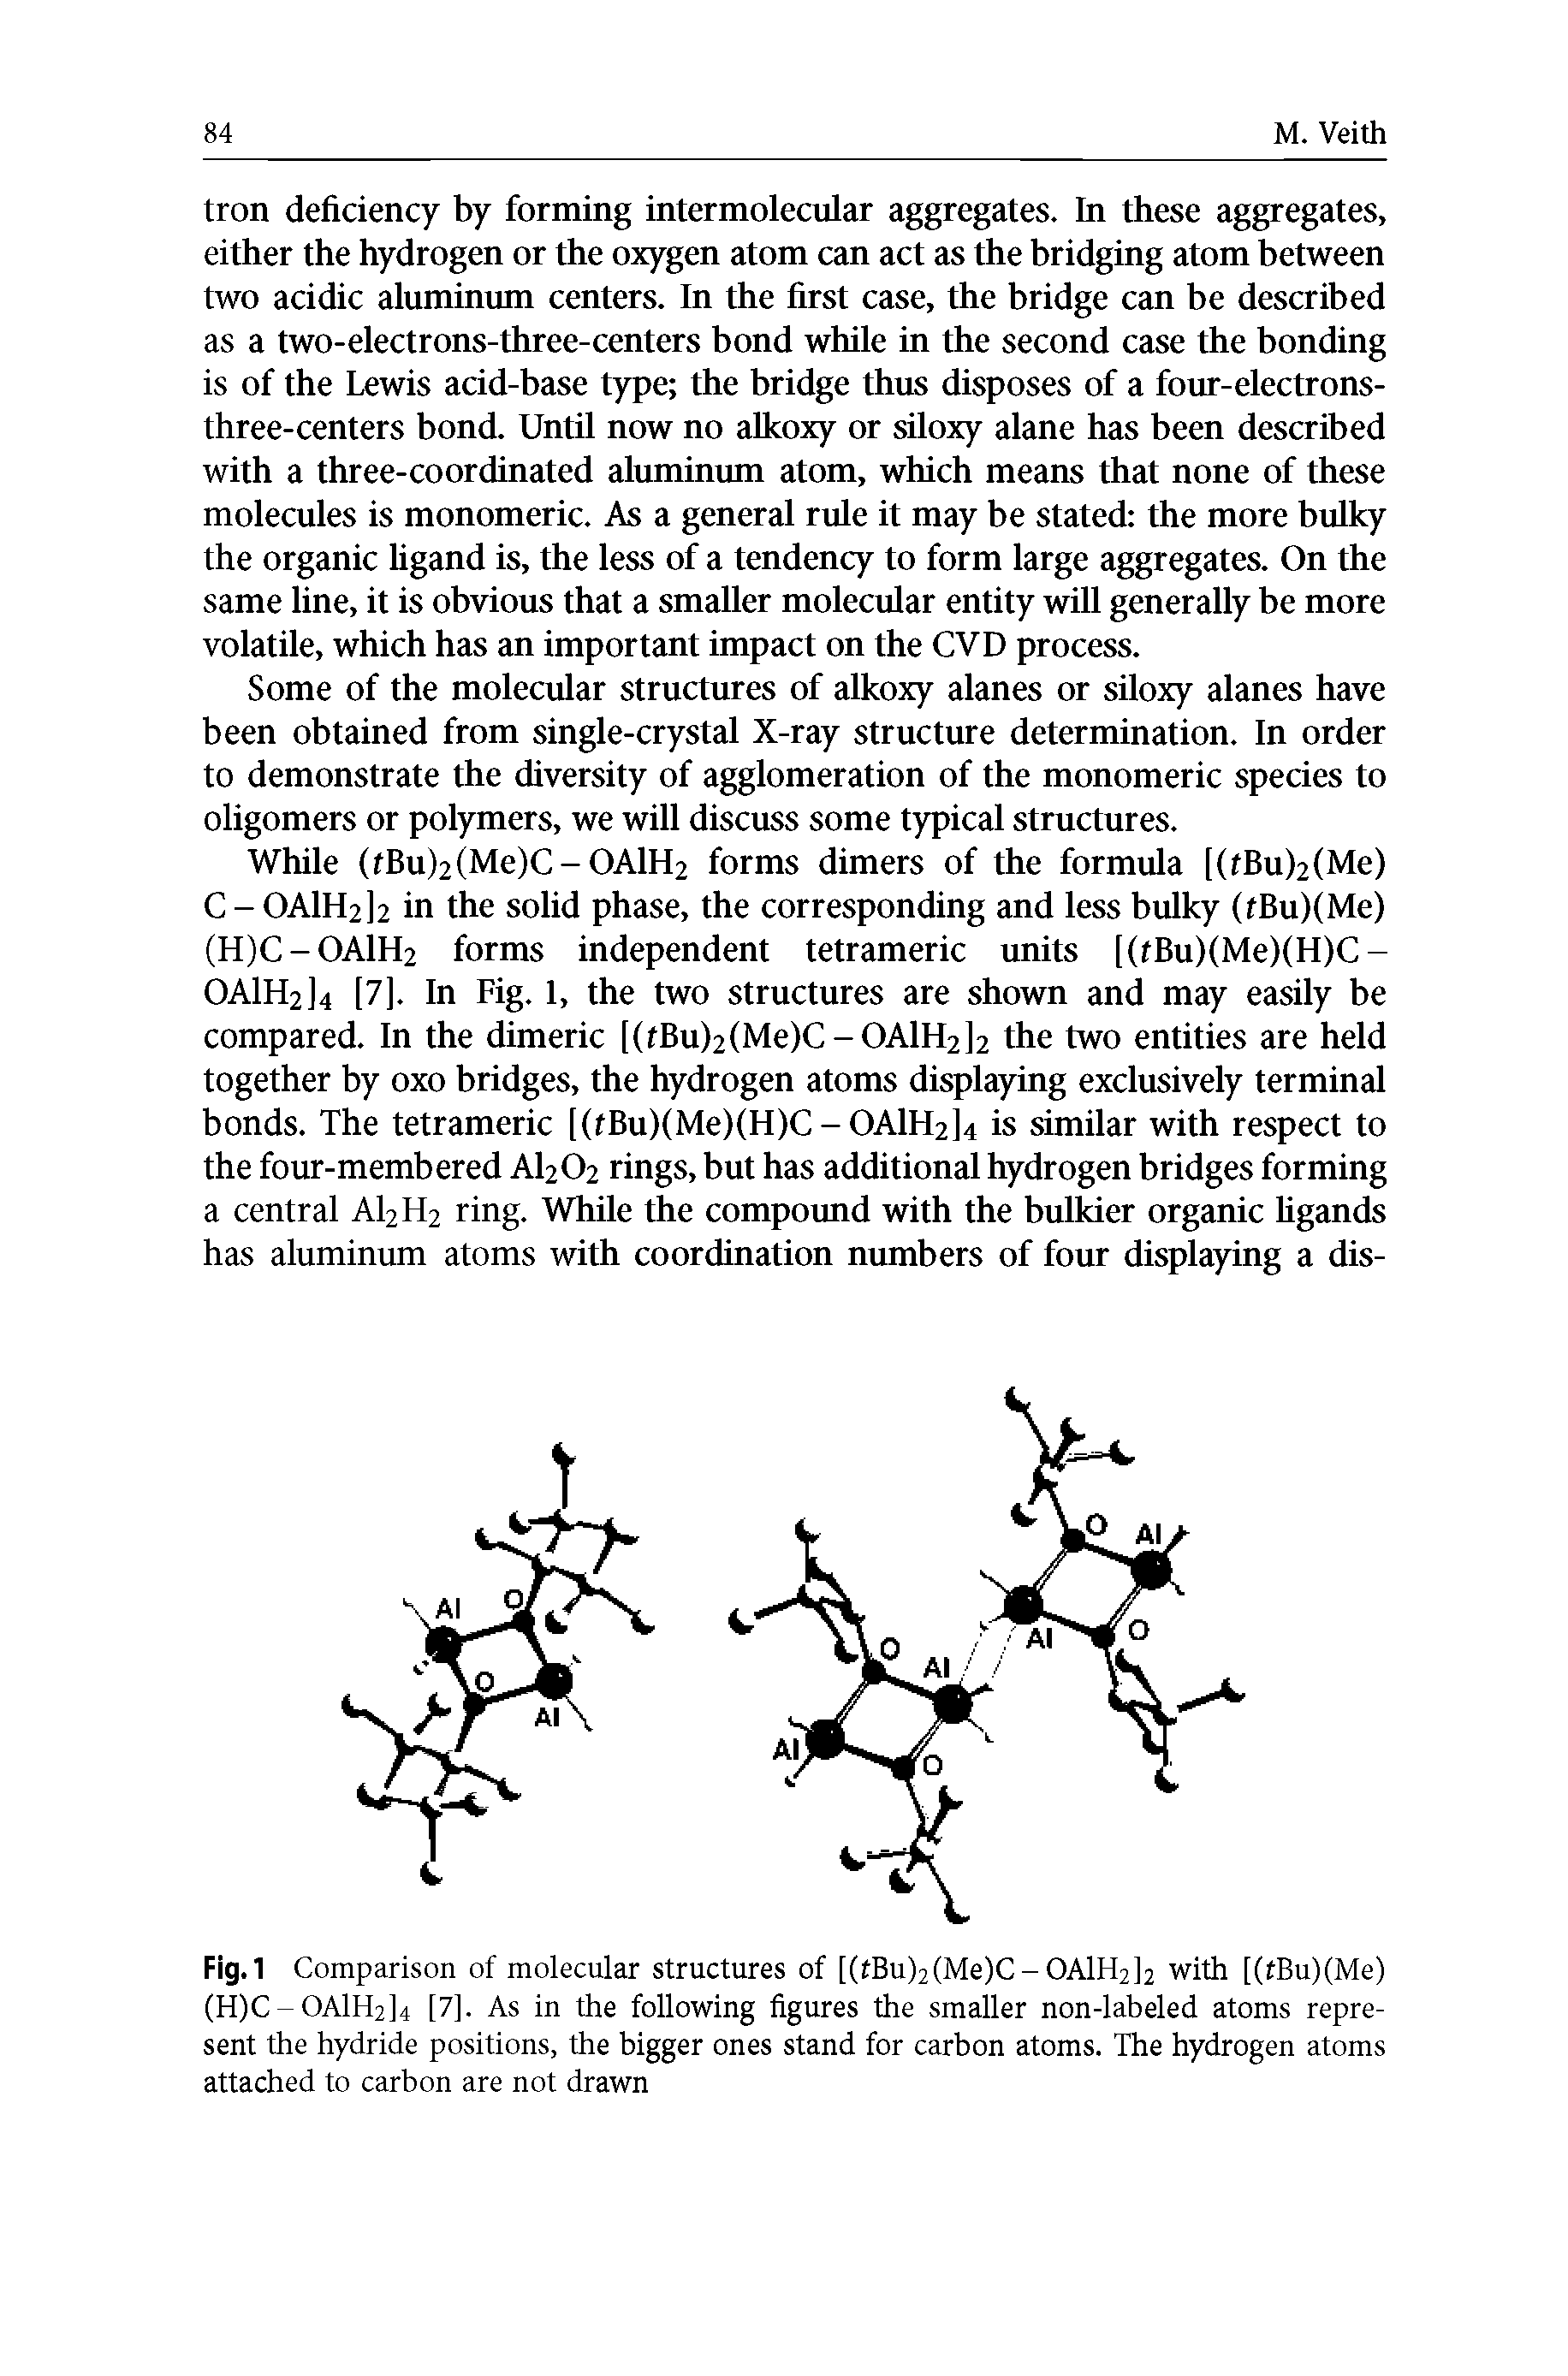 Fig. 1 Comparison of molecular structures of [(tBu)2(Me)C-OAlH2]2 with [(tBu)(Me) (H)C-0A1H2]4 [7]. As in the following figures the smaller non-labeled atoms represent the hydride positions, the bigger ones stand for carbon atoms. The hydrogen atoms attached to carbon are not drawn...